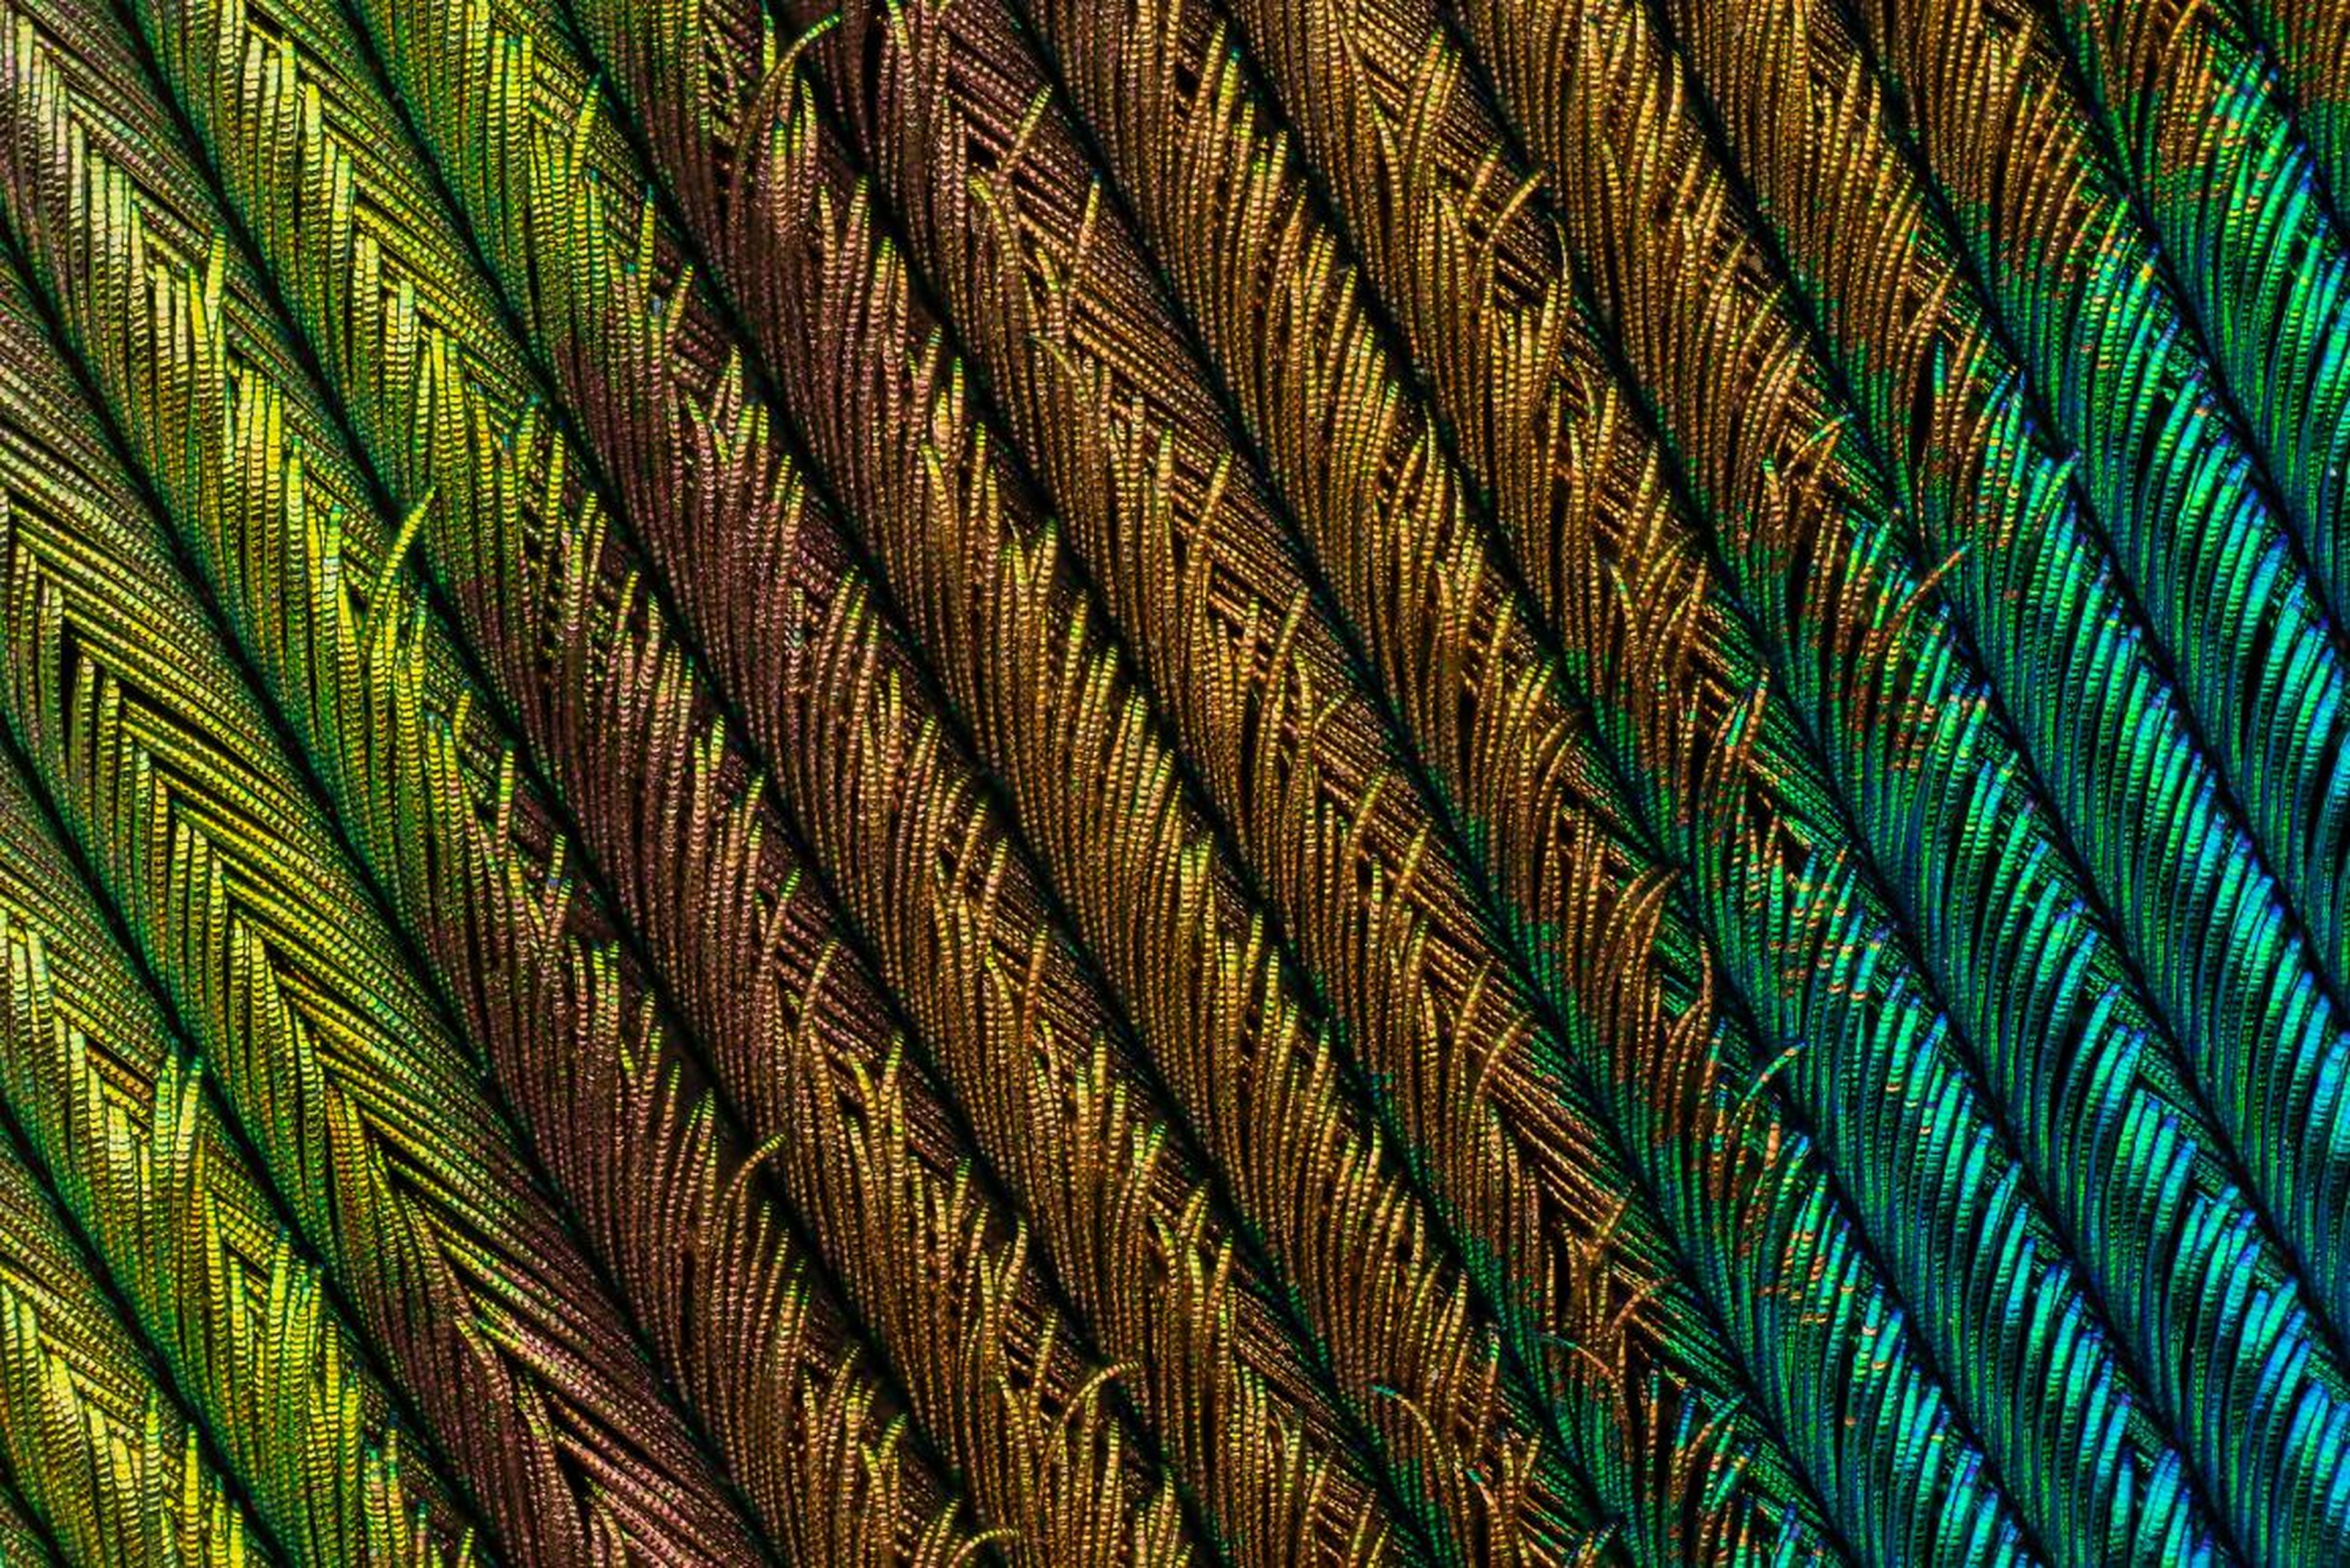 Ever seen a peacock feather this close? This is the fourth-place winner.